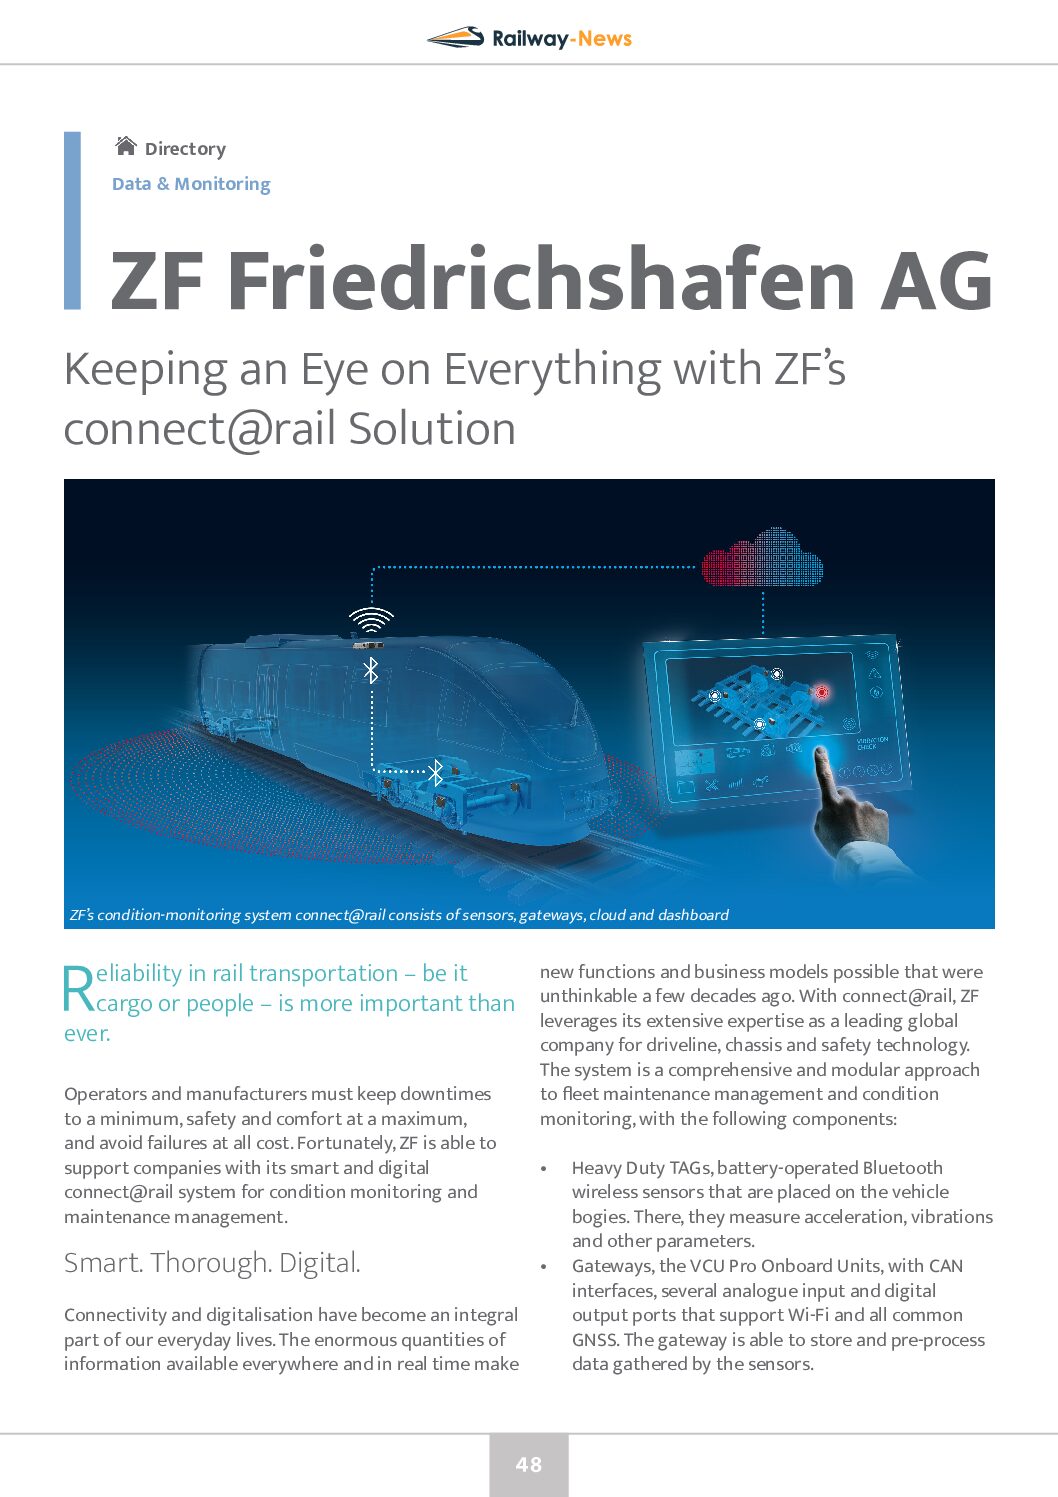 Keeping an Eye on Everything with ZF’s connect@rail Solution